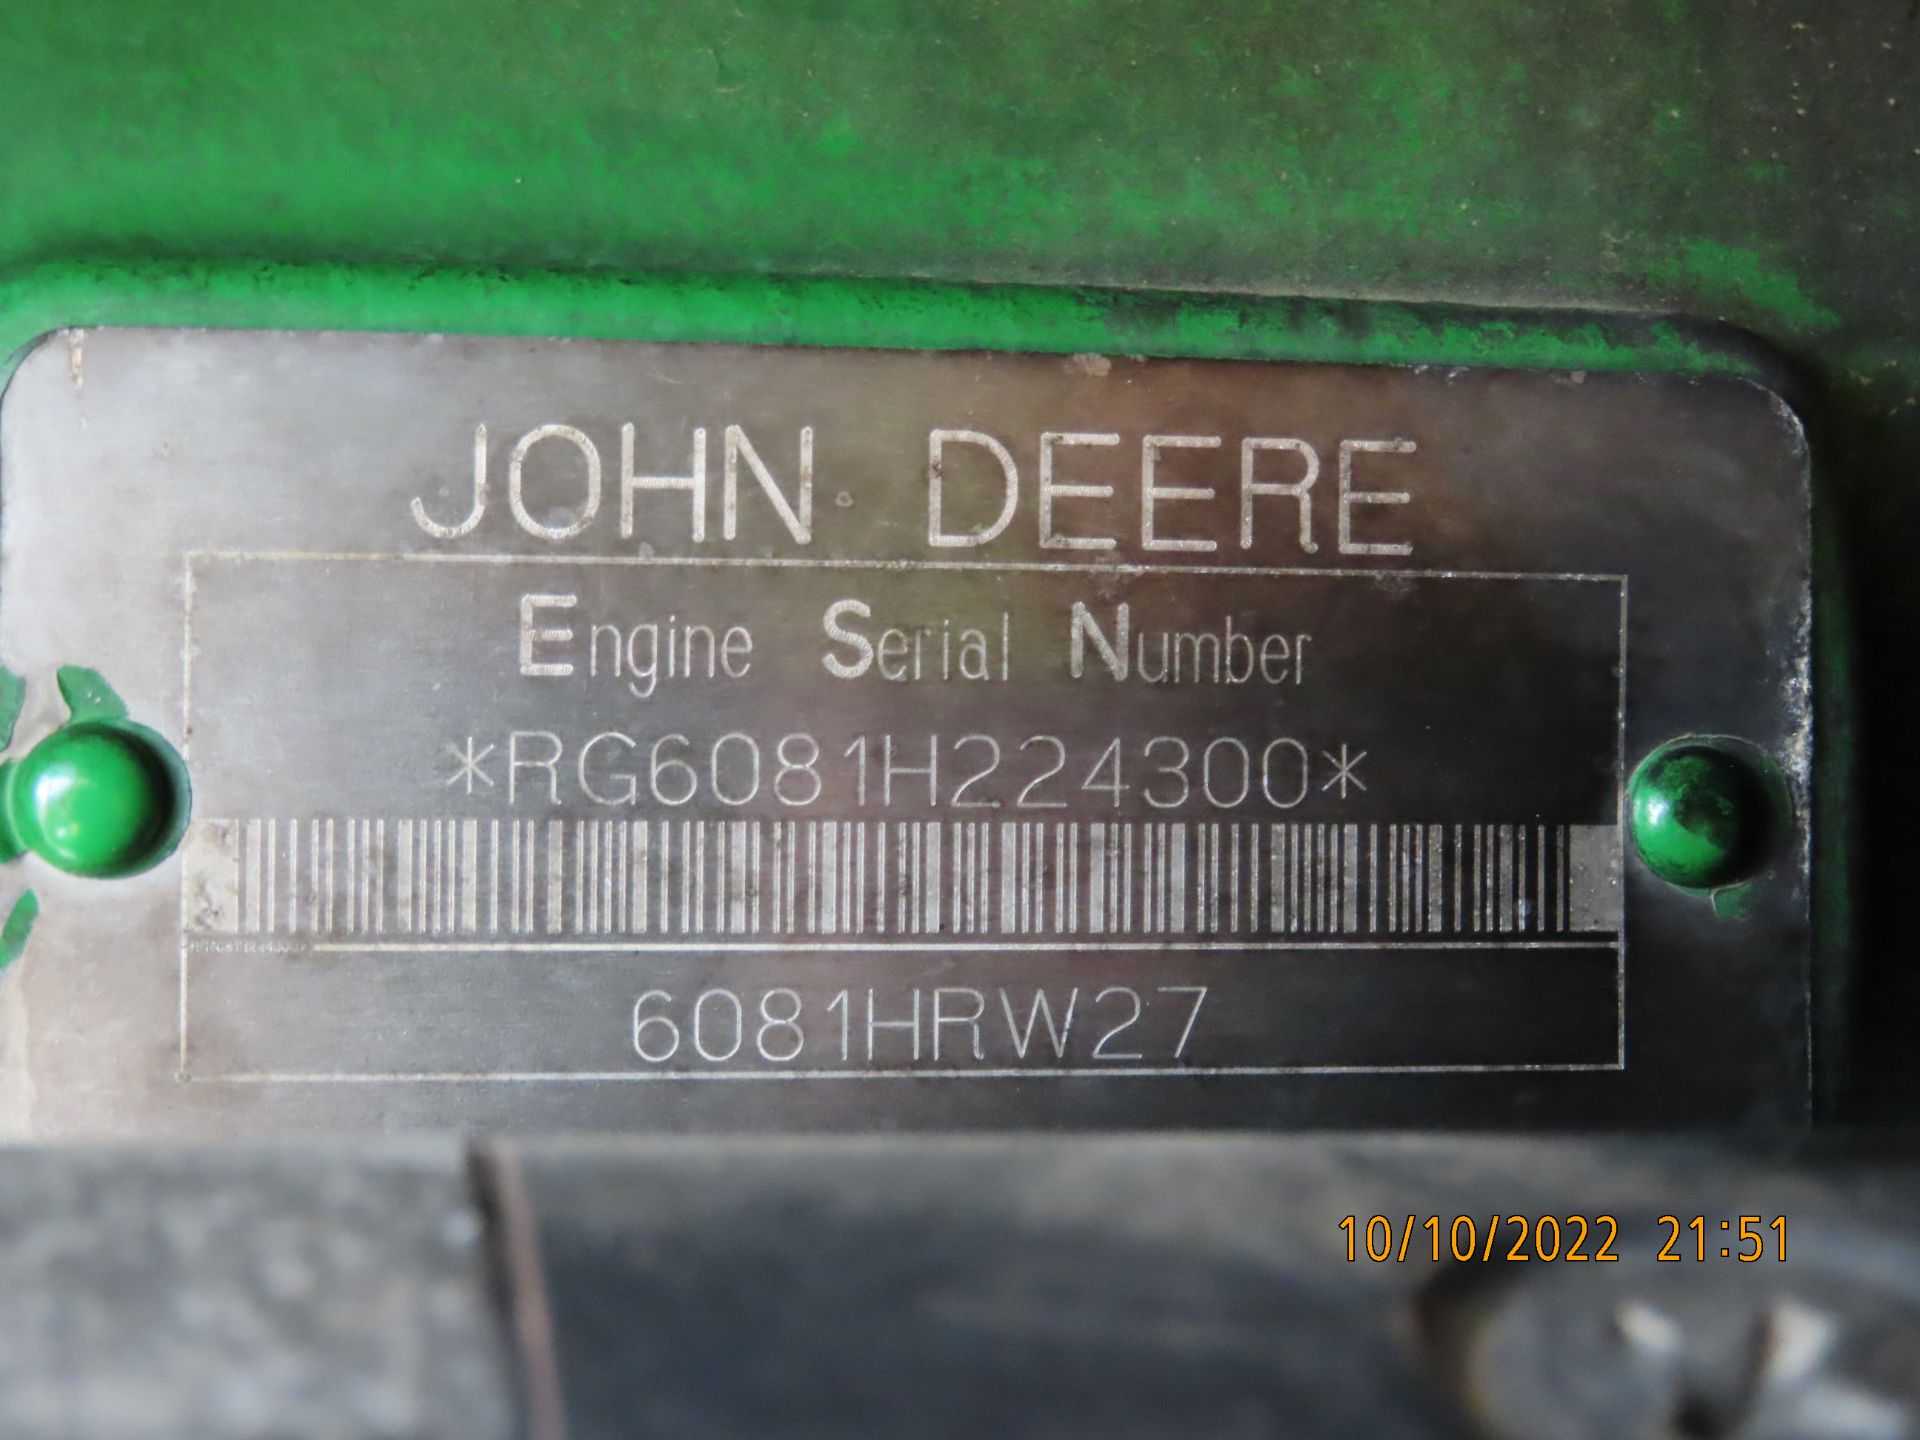 (2005) John Deere mod. 8420 Tractor, 4-WD Cab w/ Air Conditioning; Hours: 8,808; S/N RG6081H224300 - Image 10 of 10